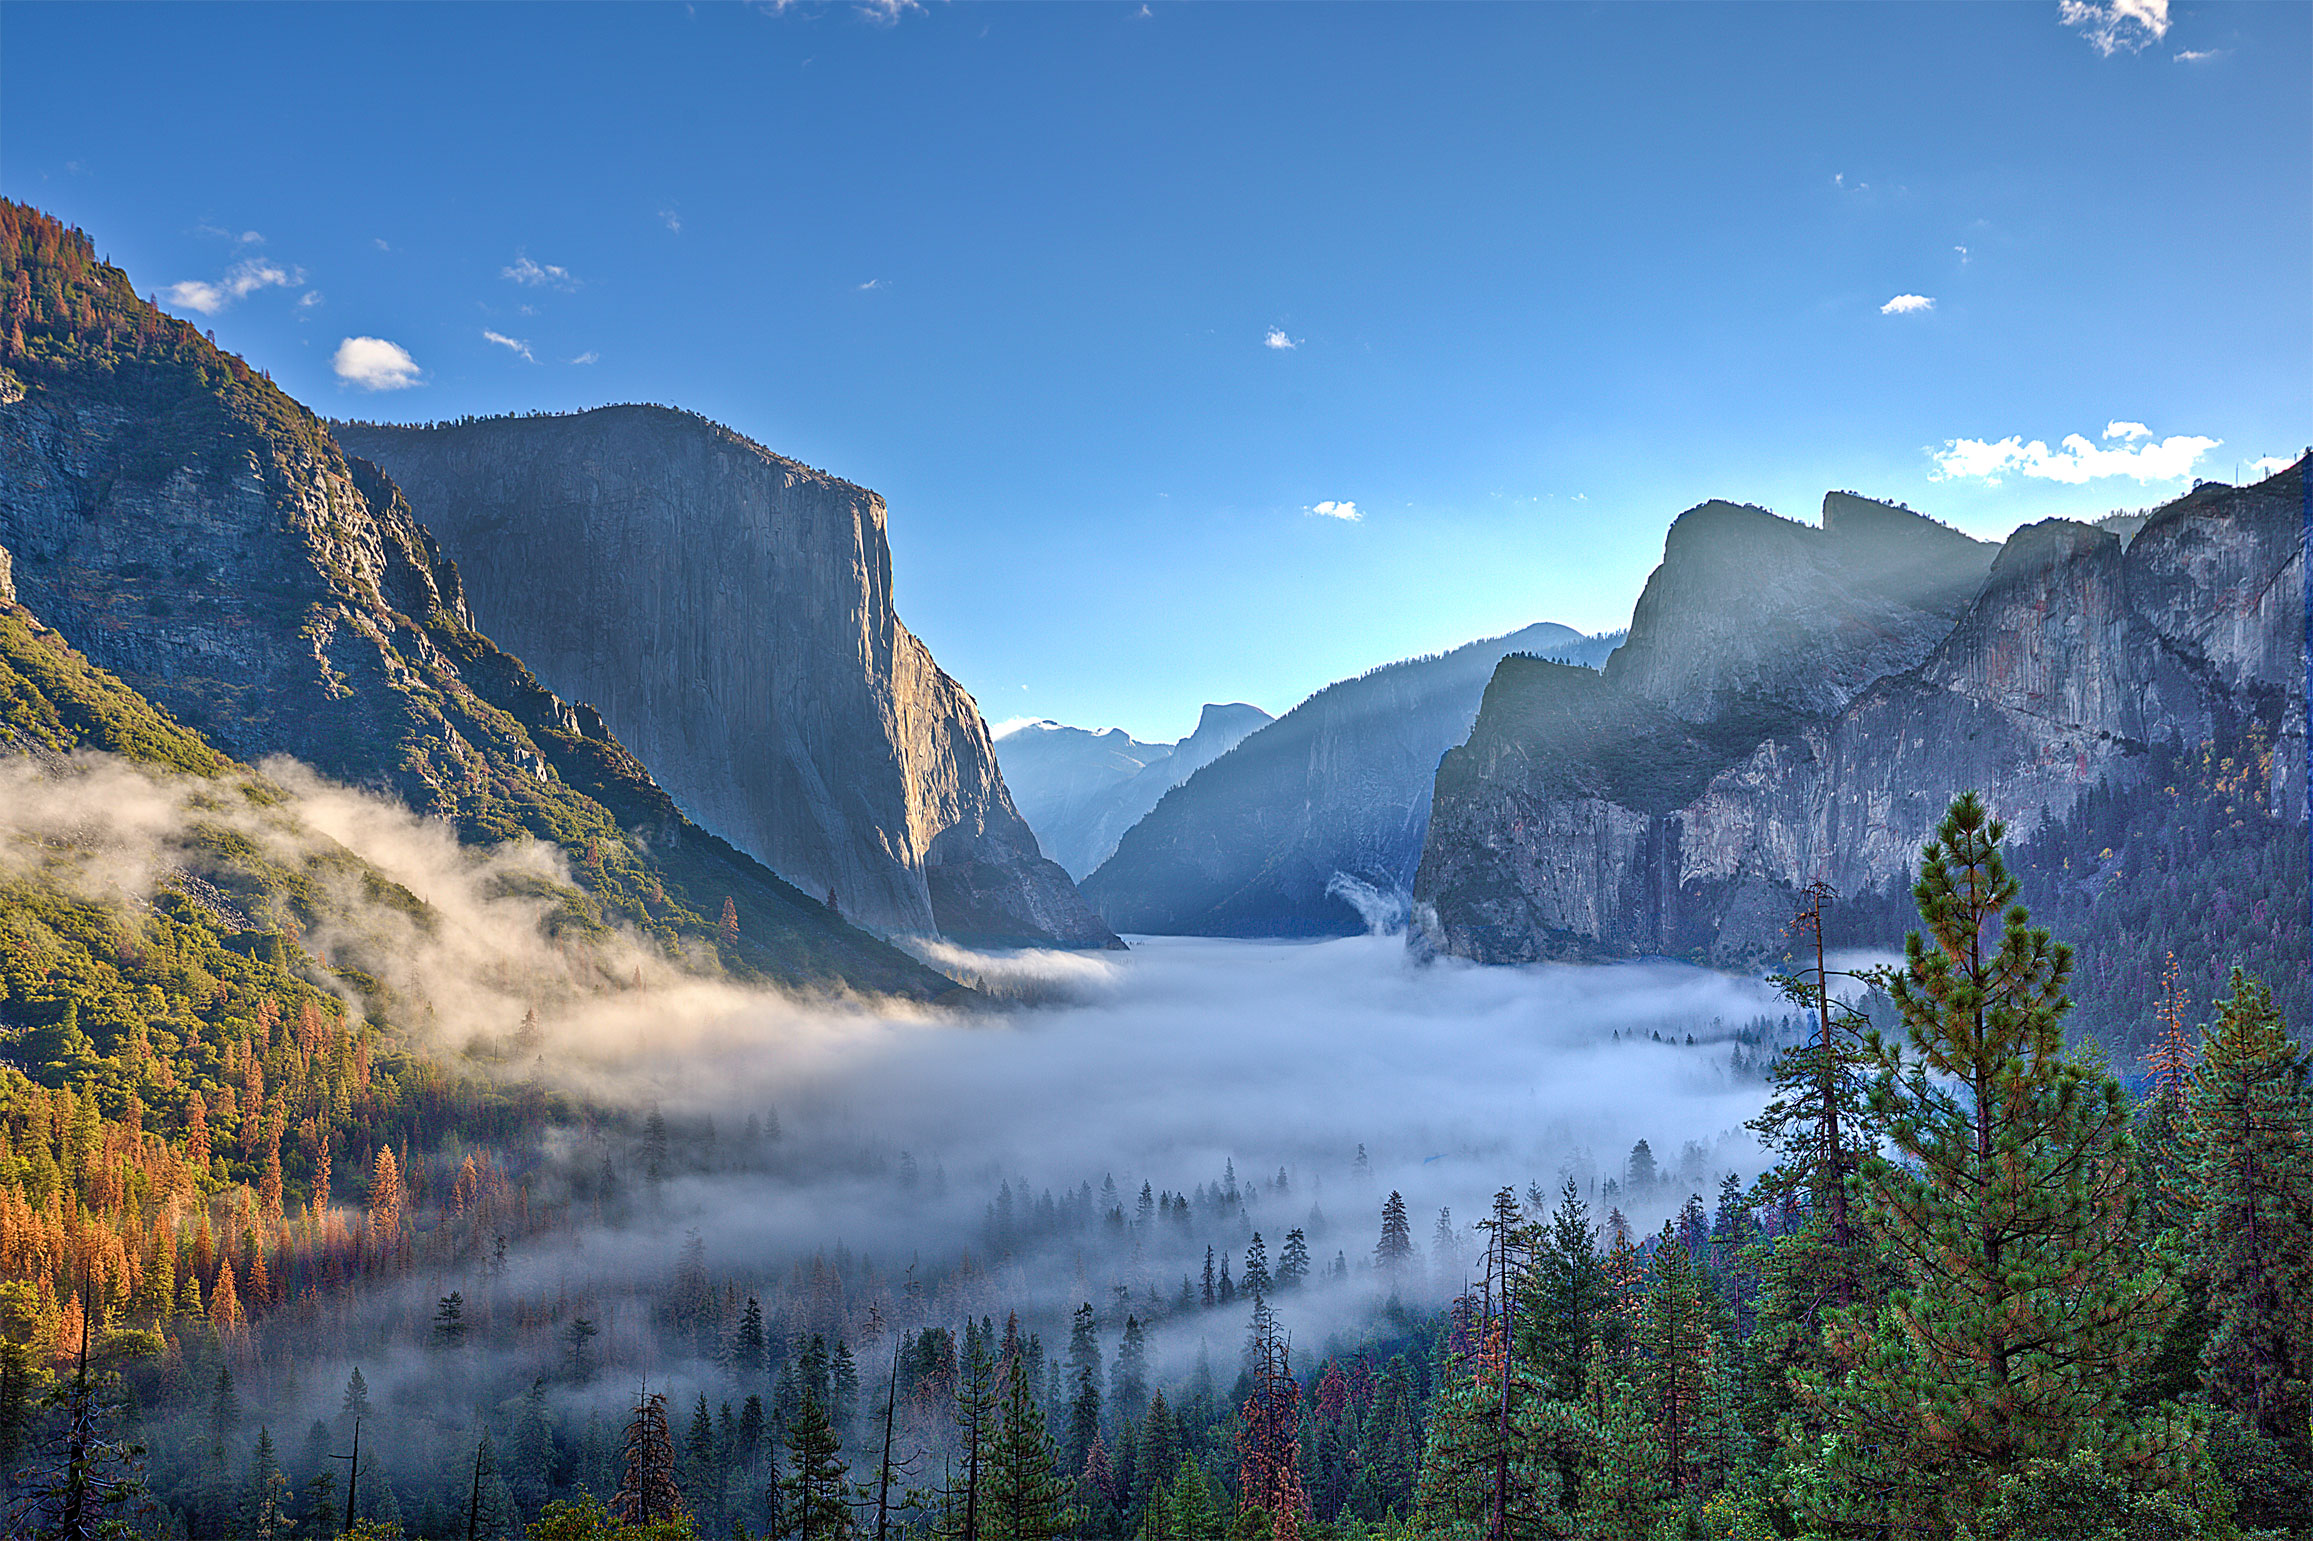 The famous “Tunnel View” and “El Capitan” shortly after Sunrise with the morning fog still resting over the valley.  As you can see, the day started out with clear blue skies (but alas, it would not last!)